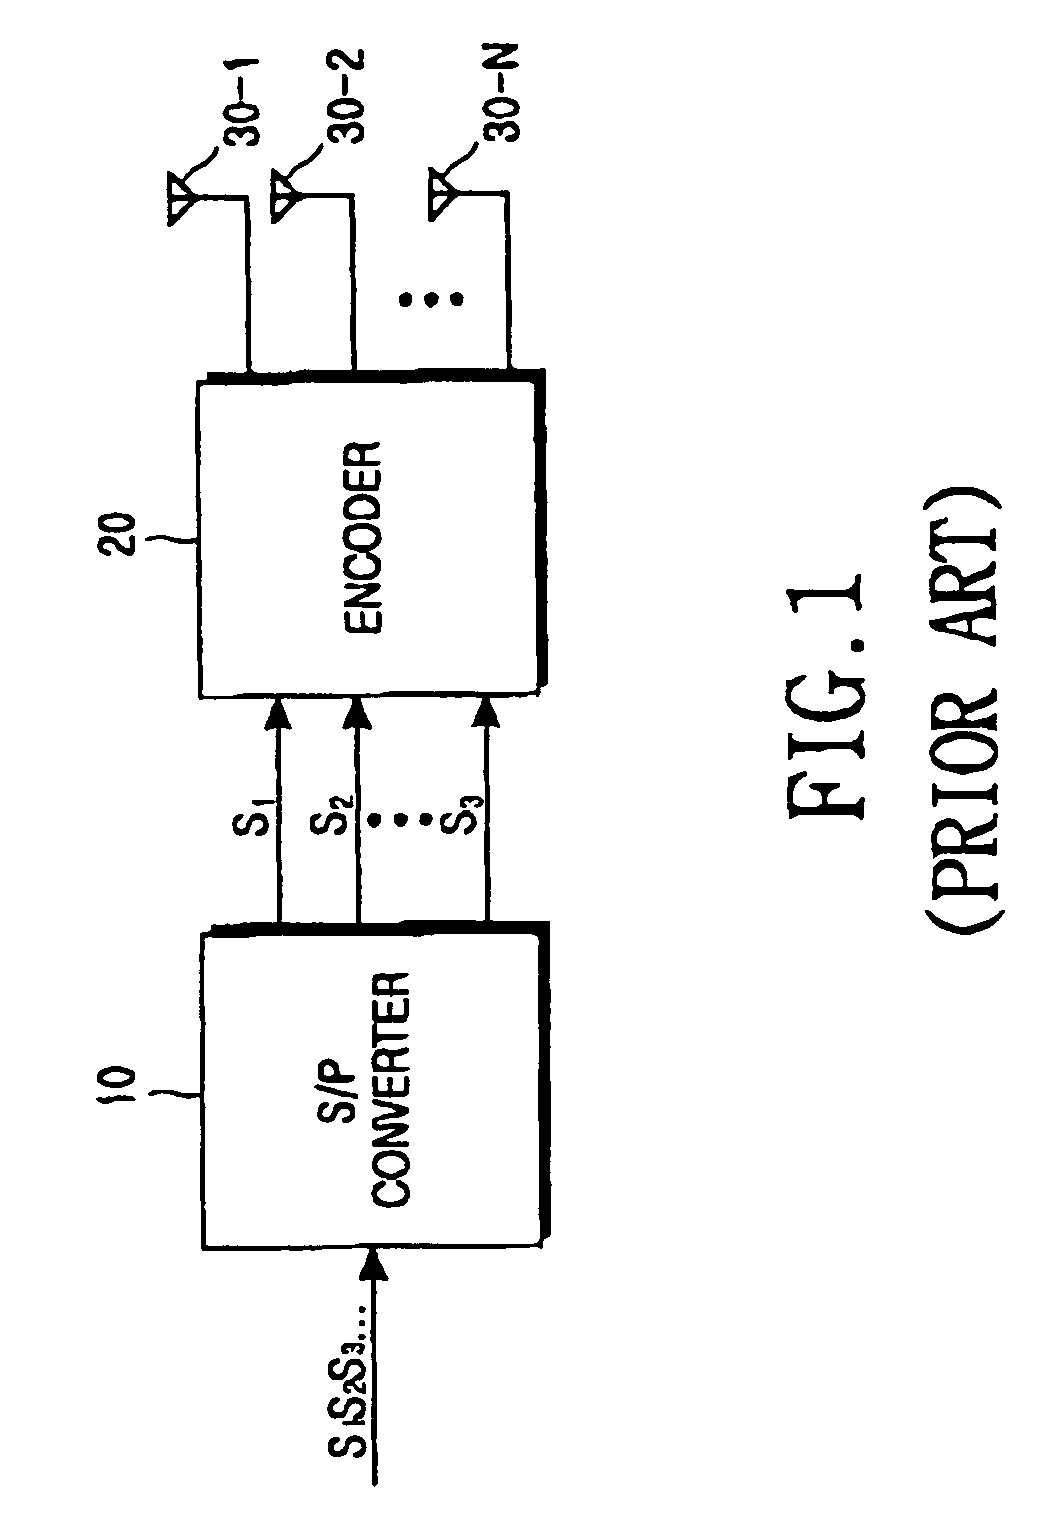 Transmitting and receiving apparatus for supporting transmit antenna diversity using space-time block code